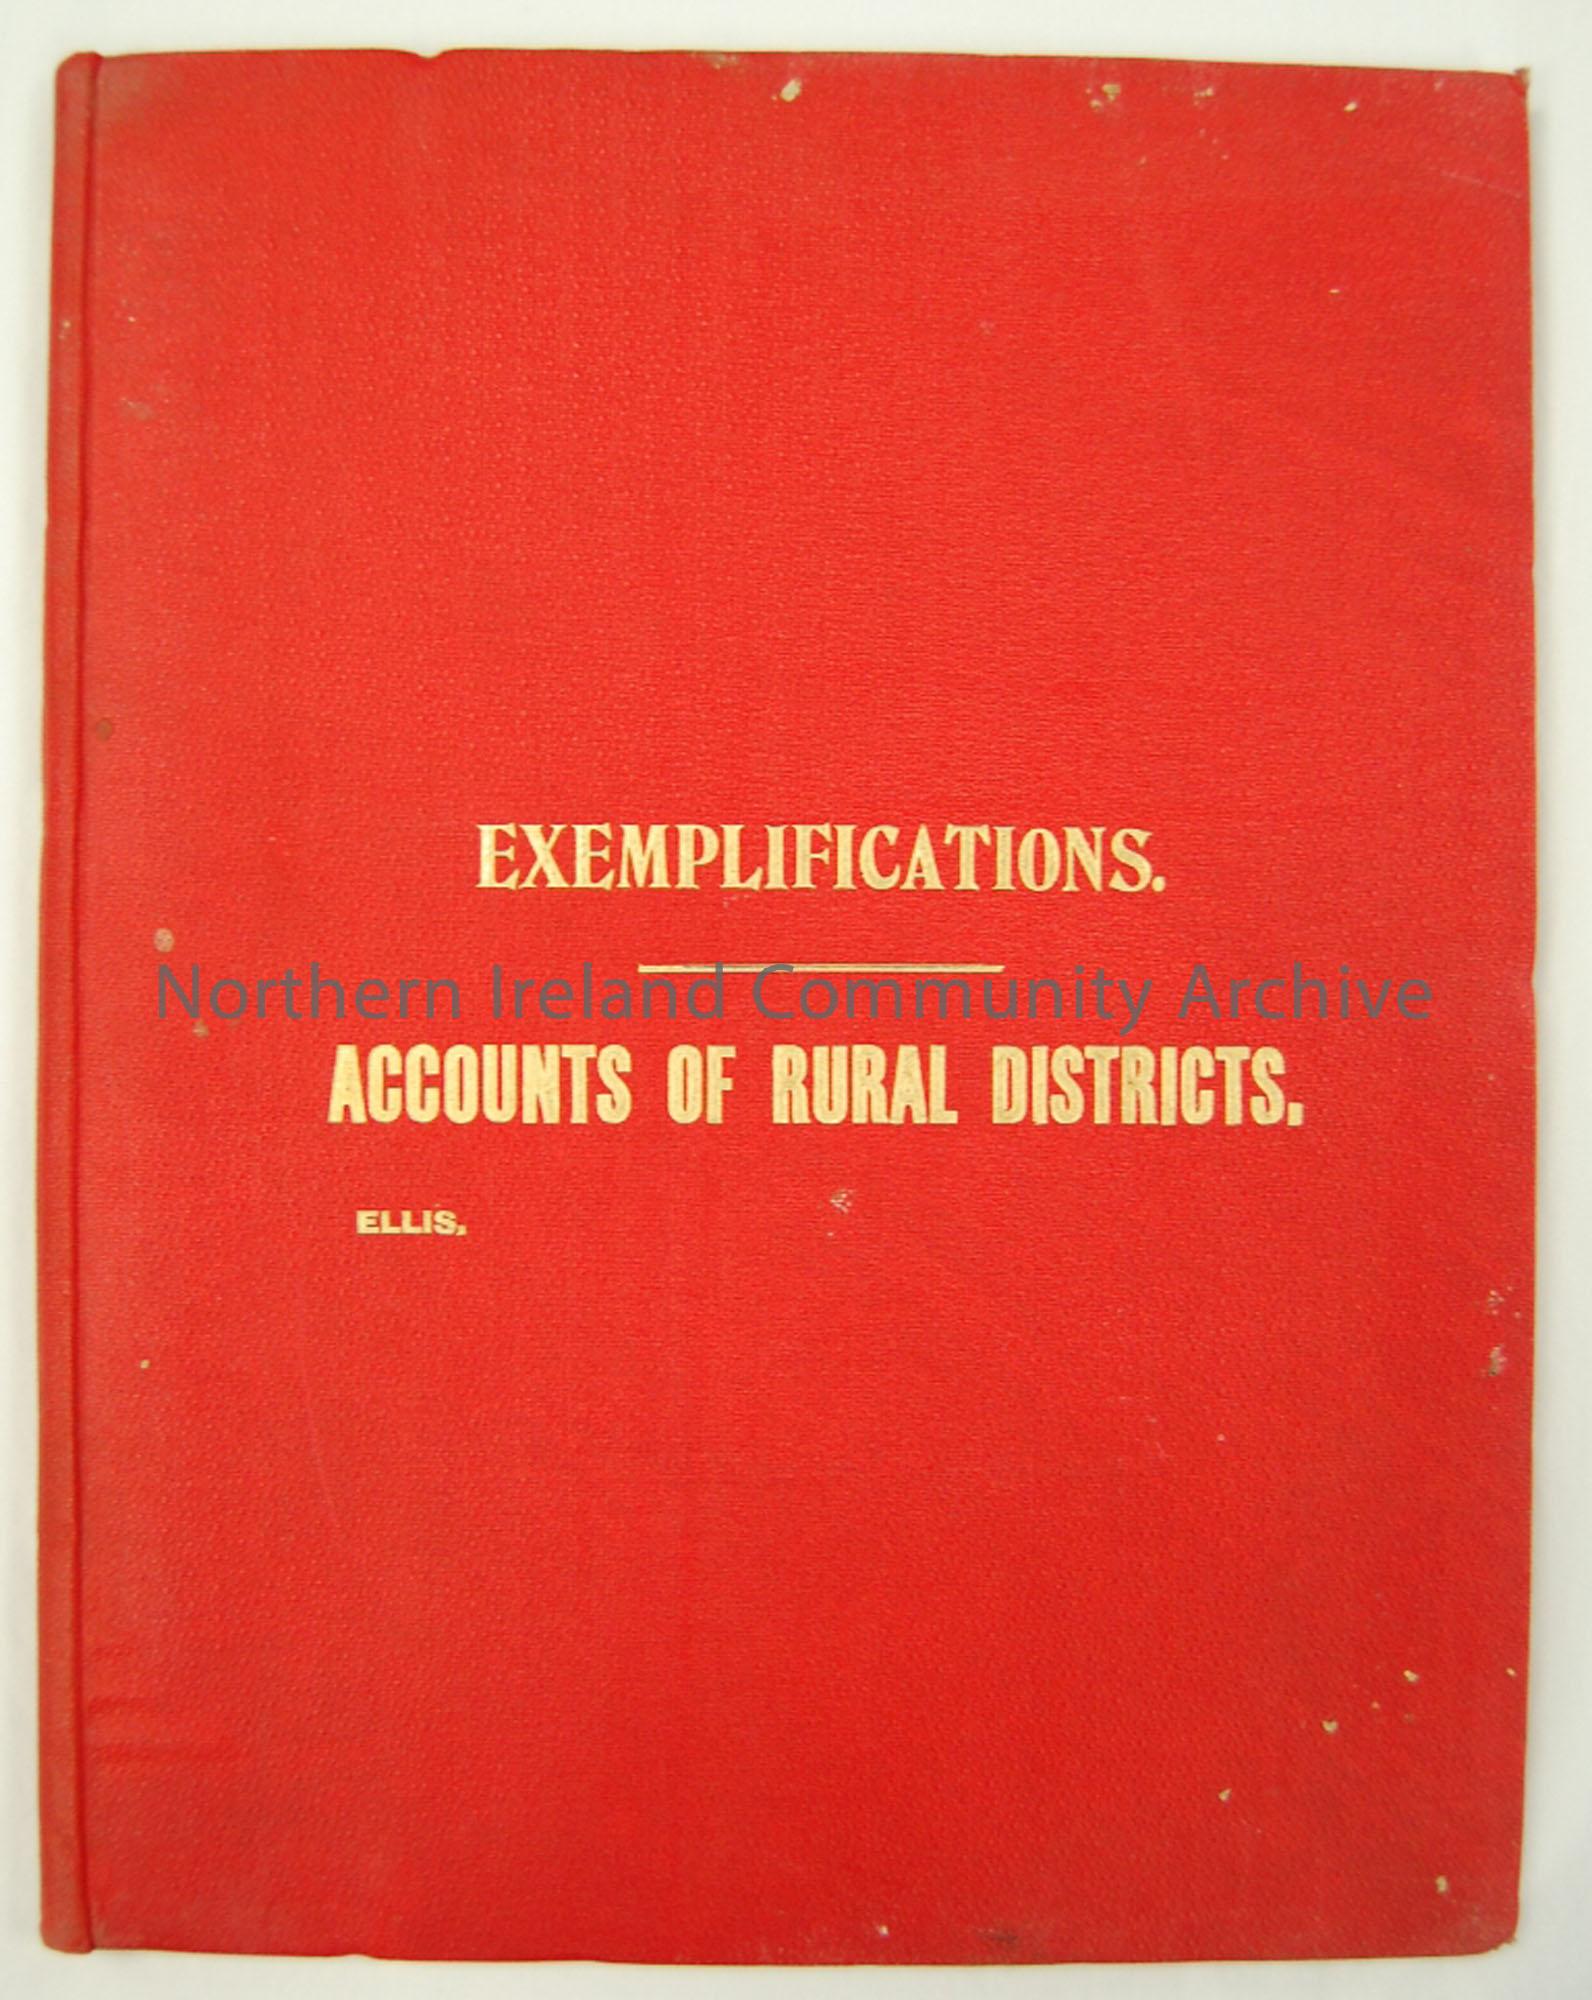 Exemplifications. Accounts of Rural Districts. 1900